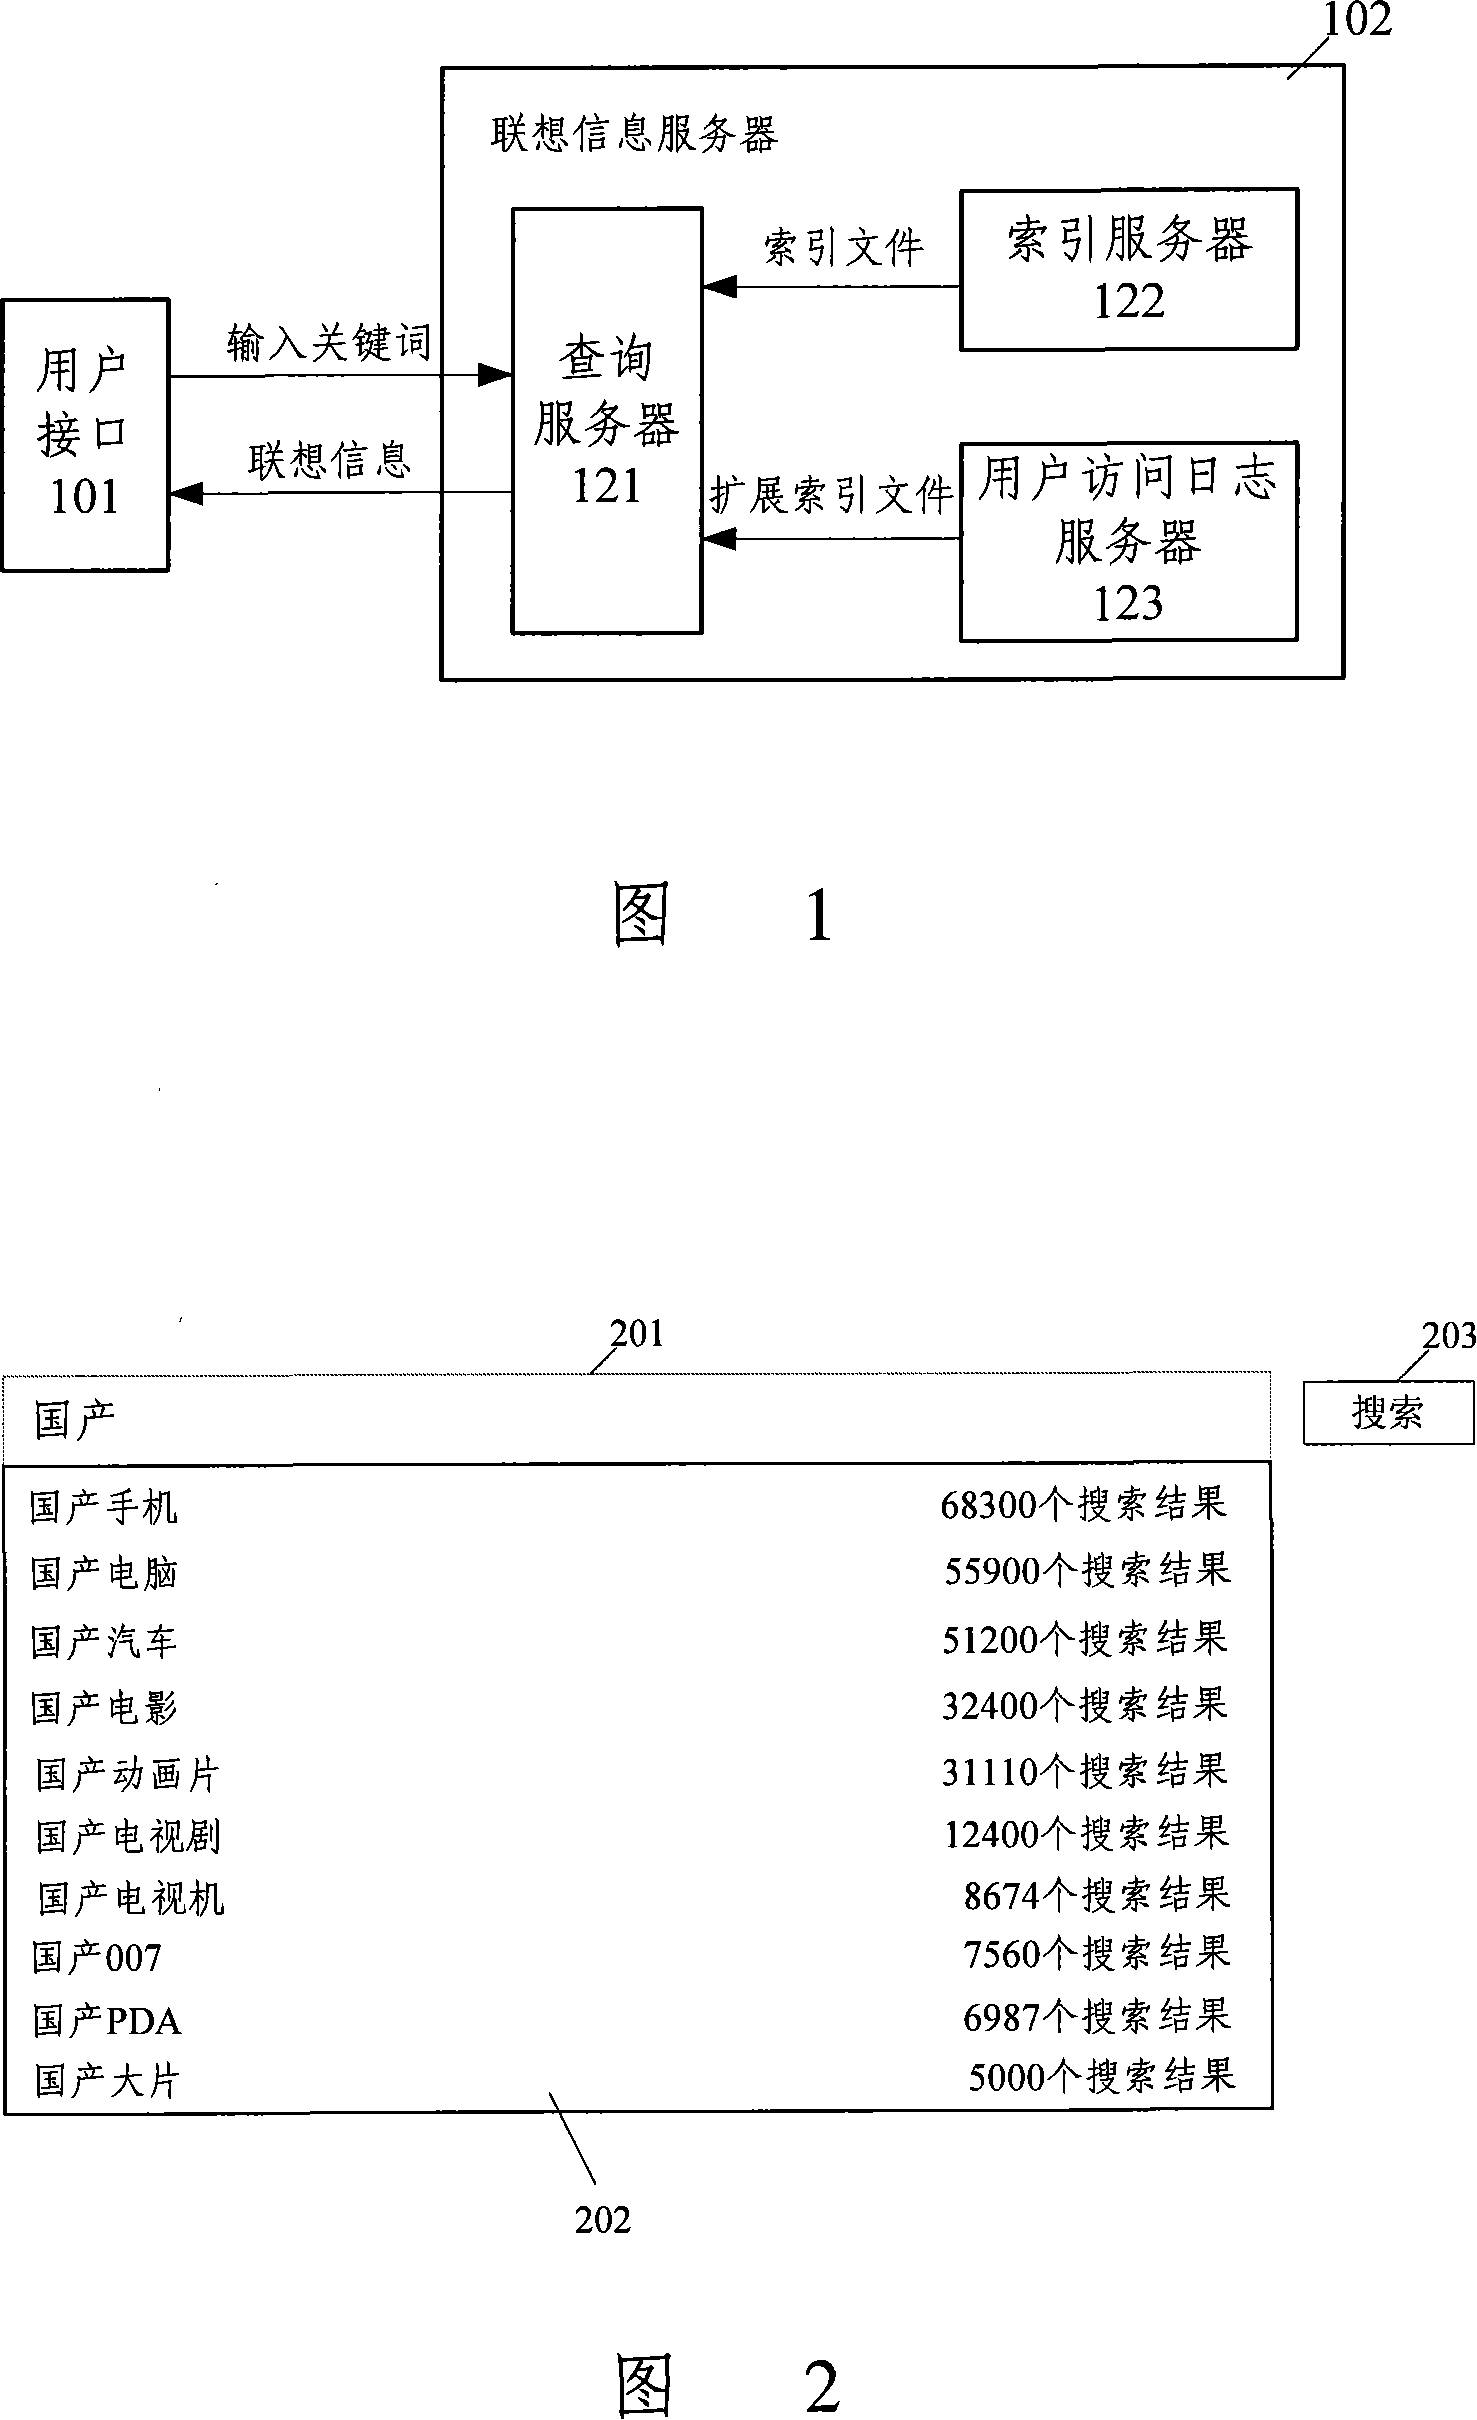 Association information generating system of key words and generation method thereof